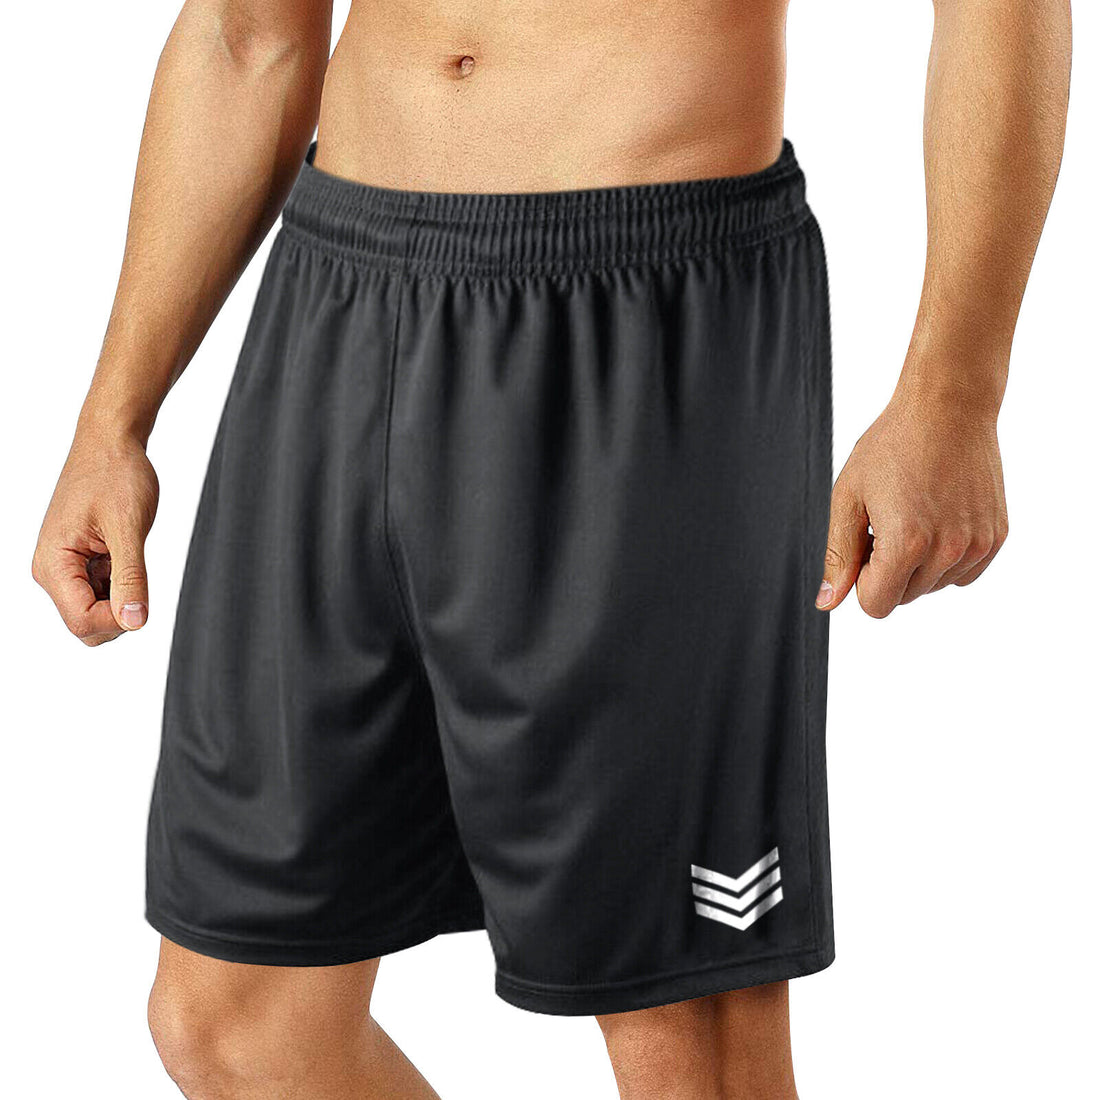 Mens Football Shorts Jogging Running Gym Sports Breathable Fitness Size S - XL